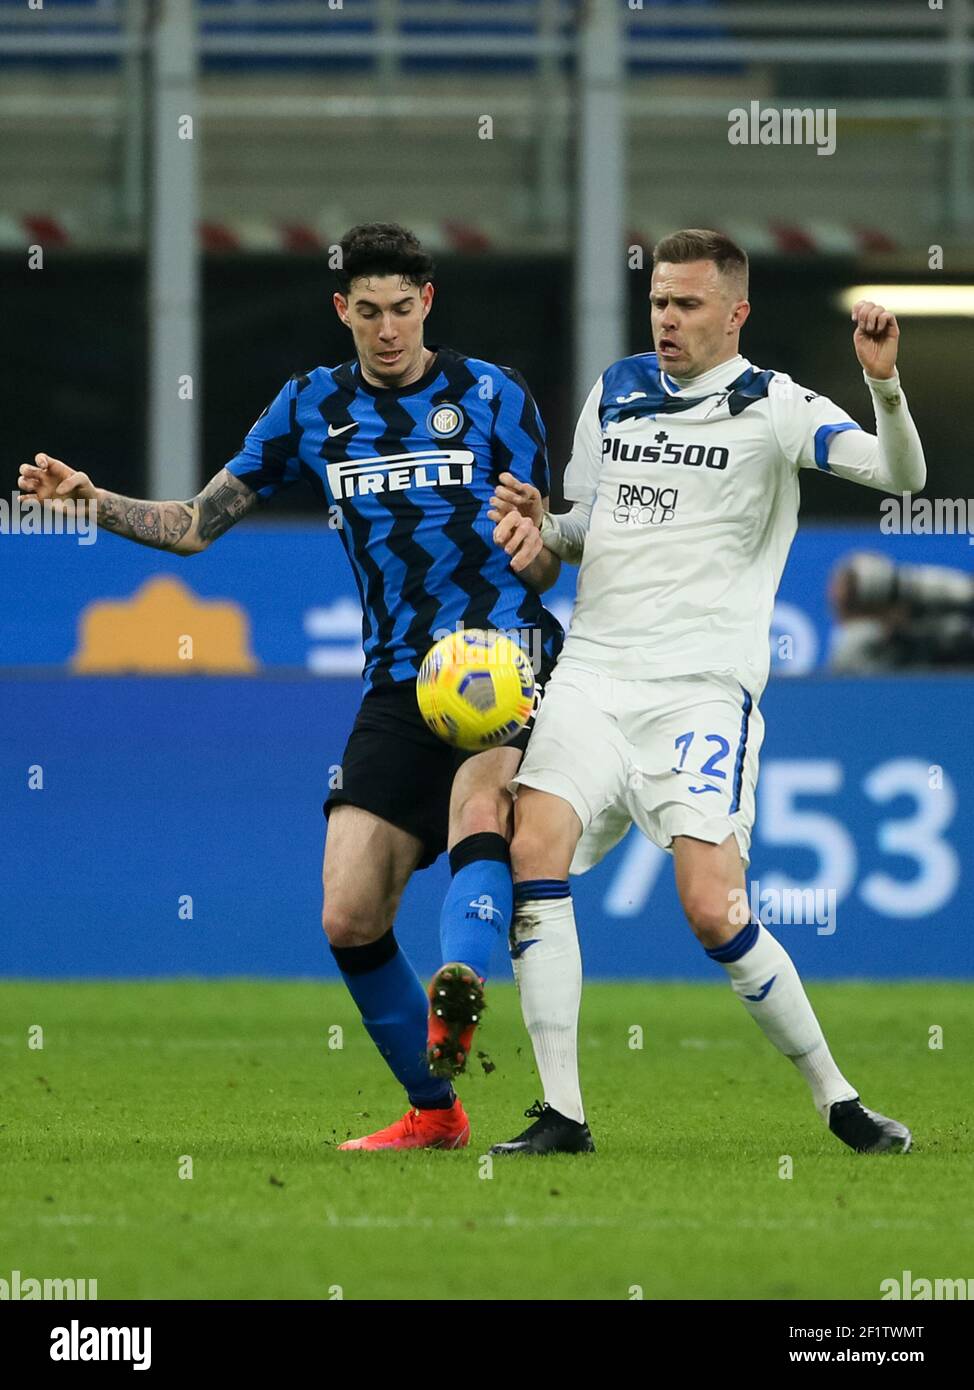 MILAN, ITALY - MARCH 8: Alessandro Bastoni of Internazionale and Josip Ilicic of Atalanta battle for possession during the Serie A match between Inter Stock Photo